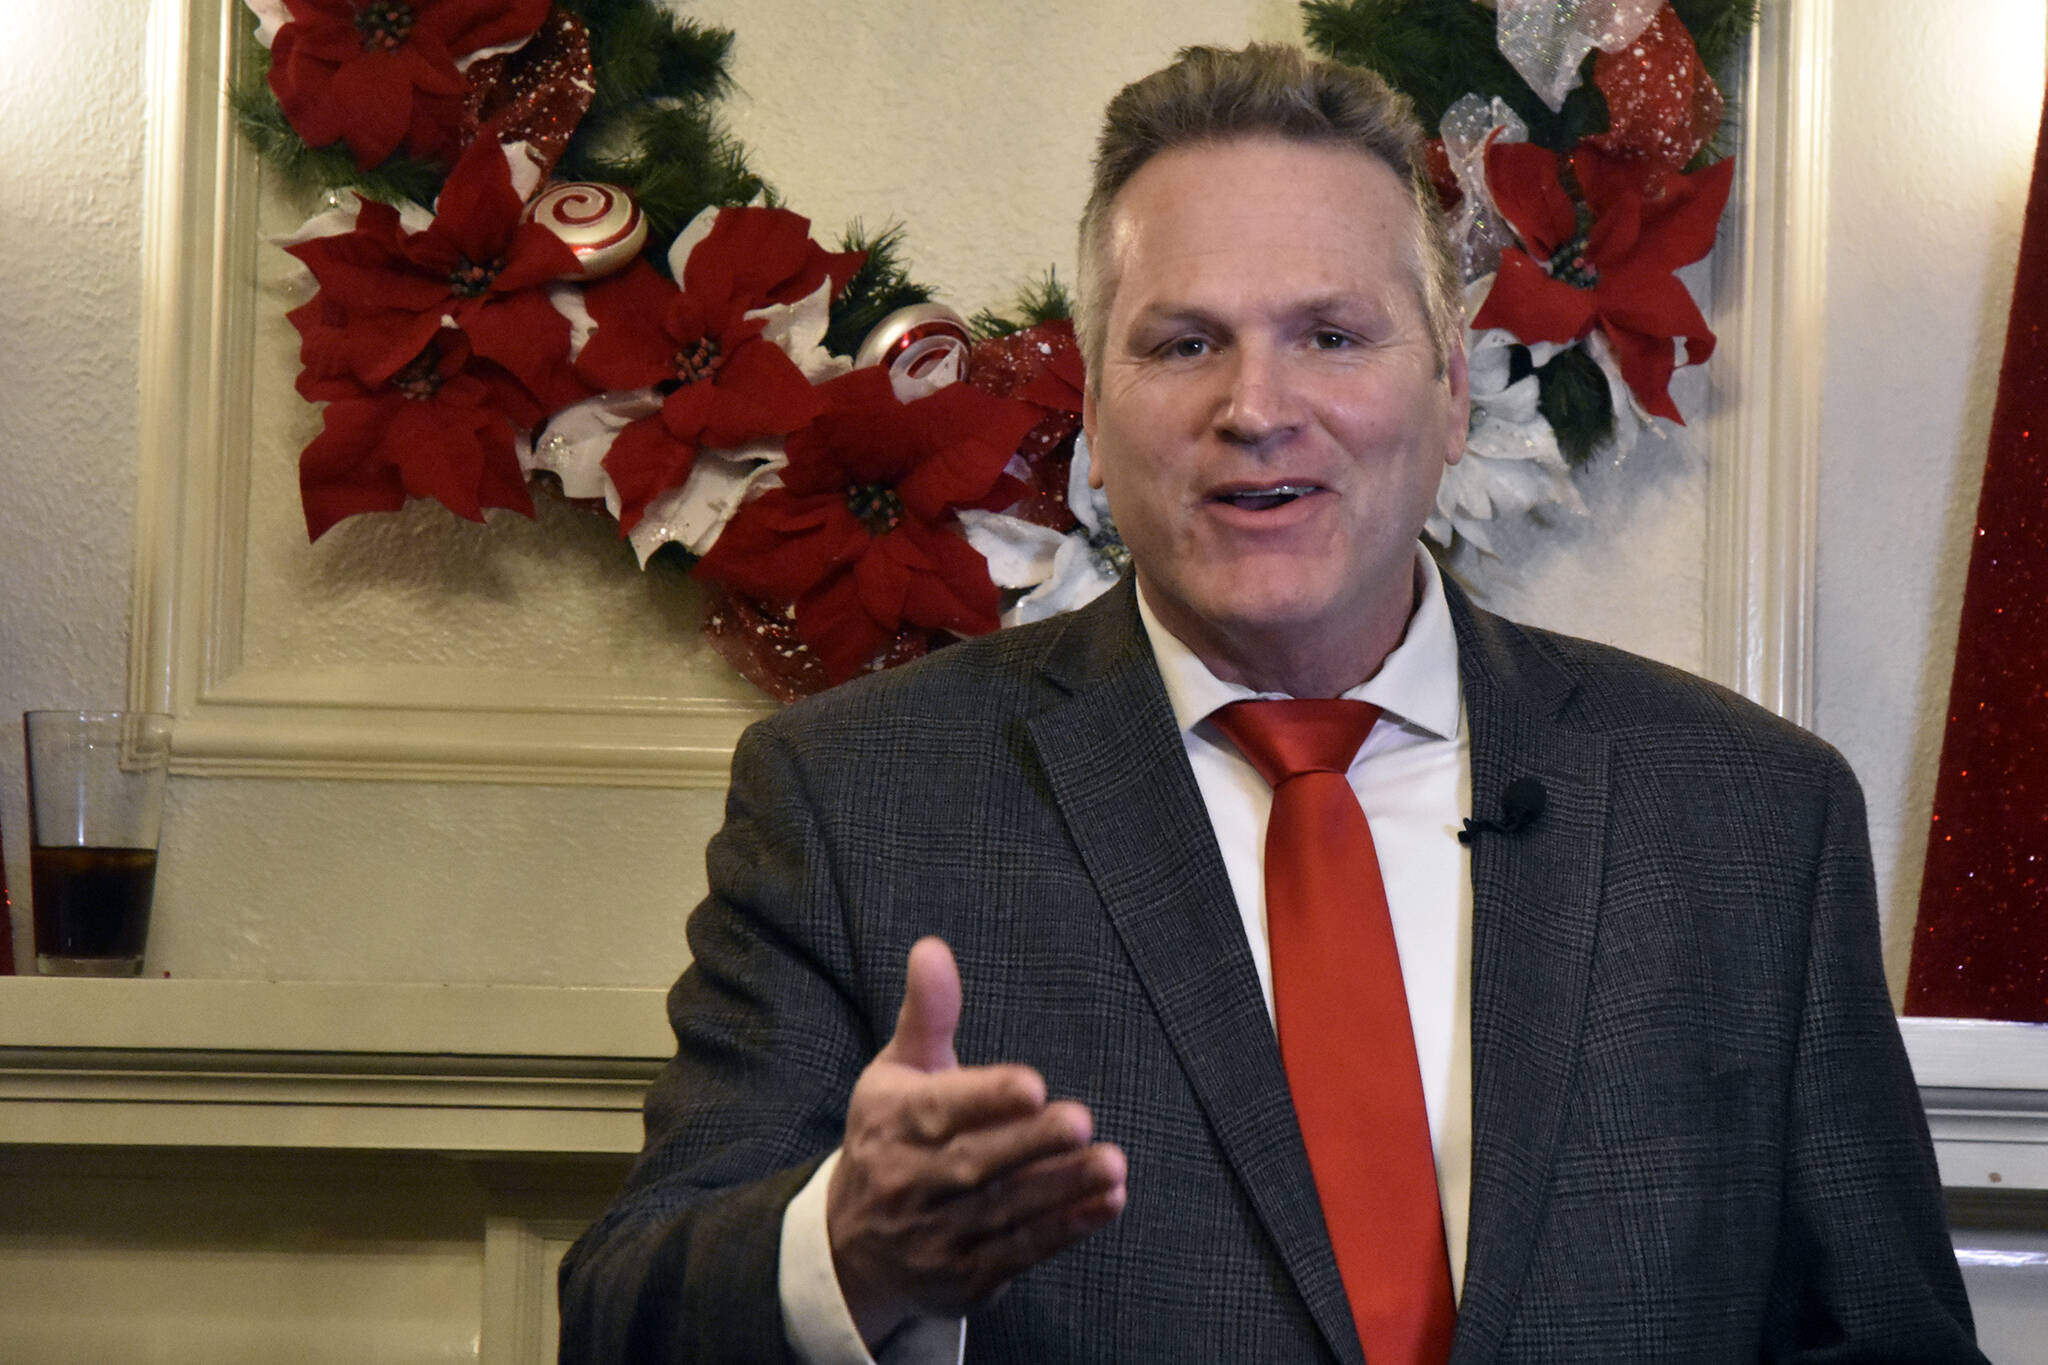 Gov. Mike Dunleavy spoke with reporters at the Alaska Governor's Mansion on Tuesday, Dec. 7, 2021, before greeting guests for the traditional Christmas open house. The event was suspended last year due to COVID-19 but was back this year with limited health mitigation rules in place. (Peter Segall / Juneau Empire)